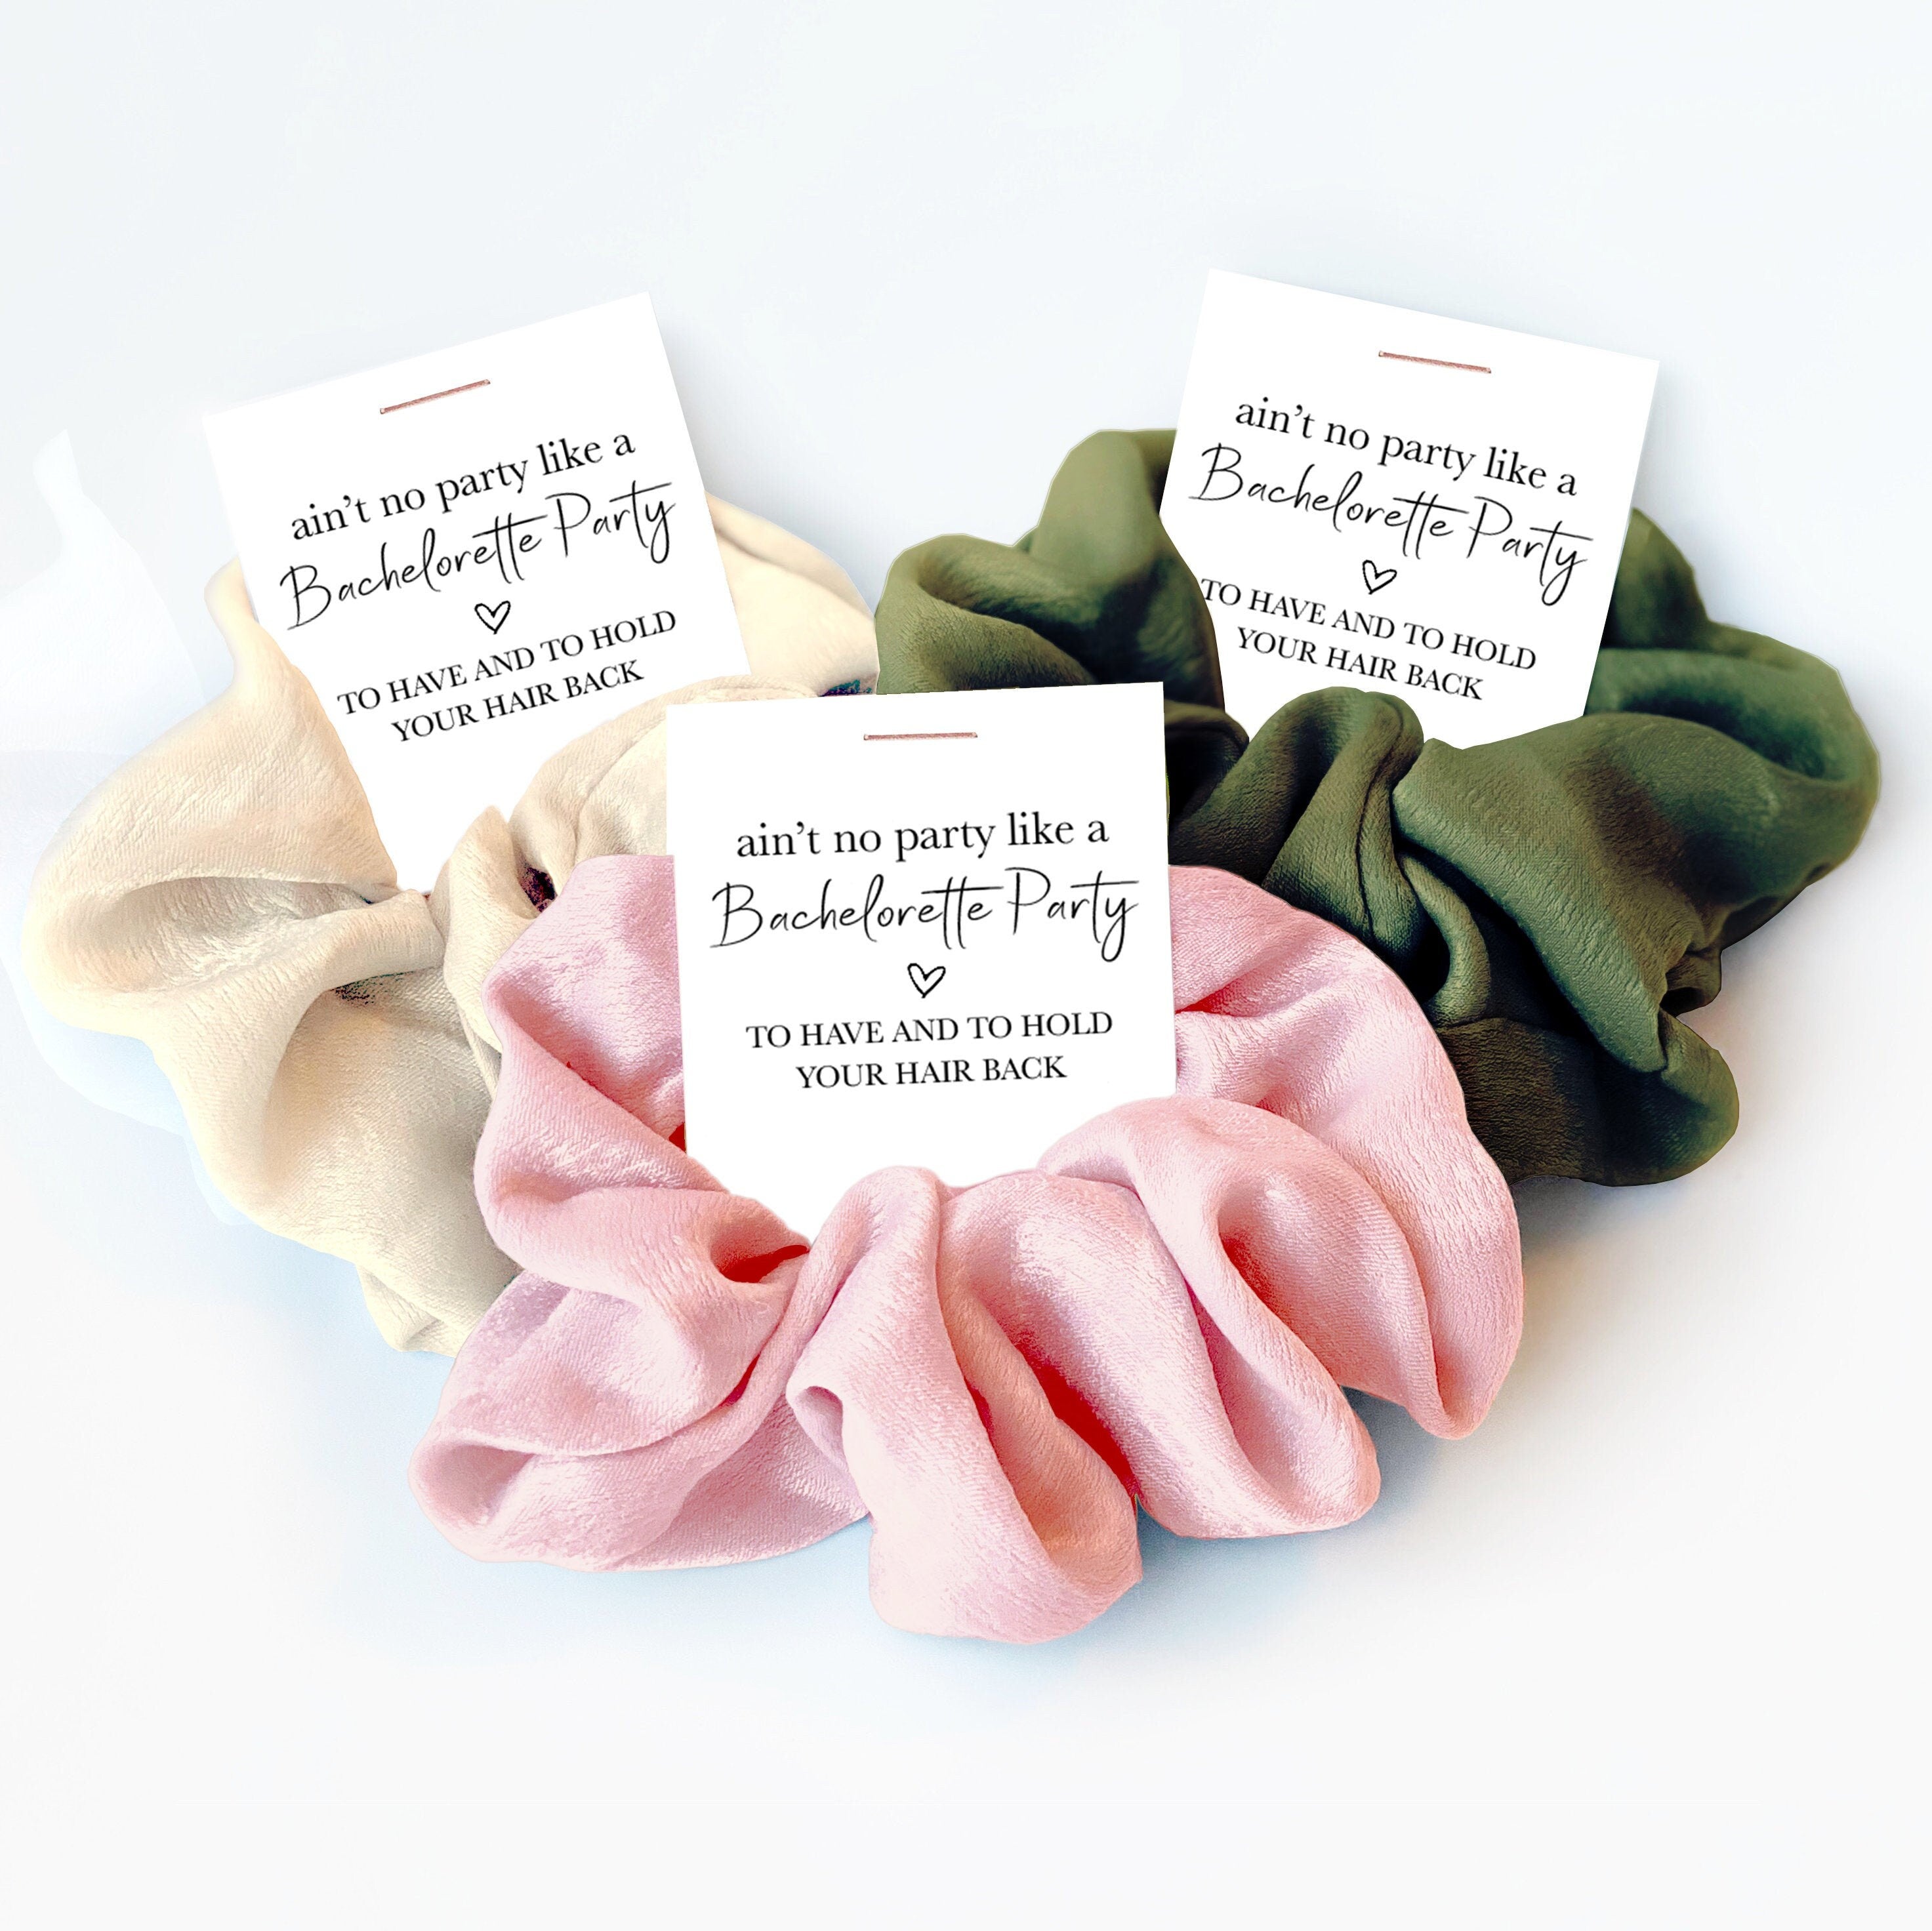 Hair Scrunchie Bachelorette Party Favors, Ain&#39;t No Party Like a Bachelorette Party, Bachelorette Favor, To Have And To Hold Your Hair Back